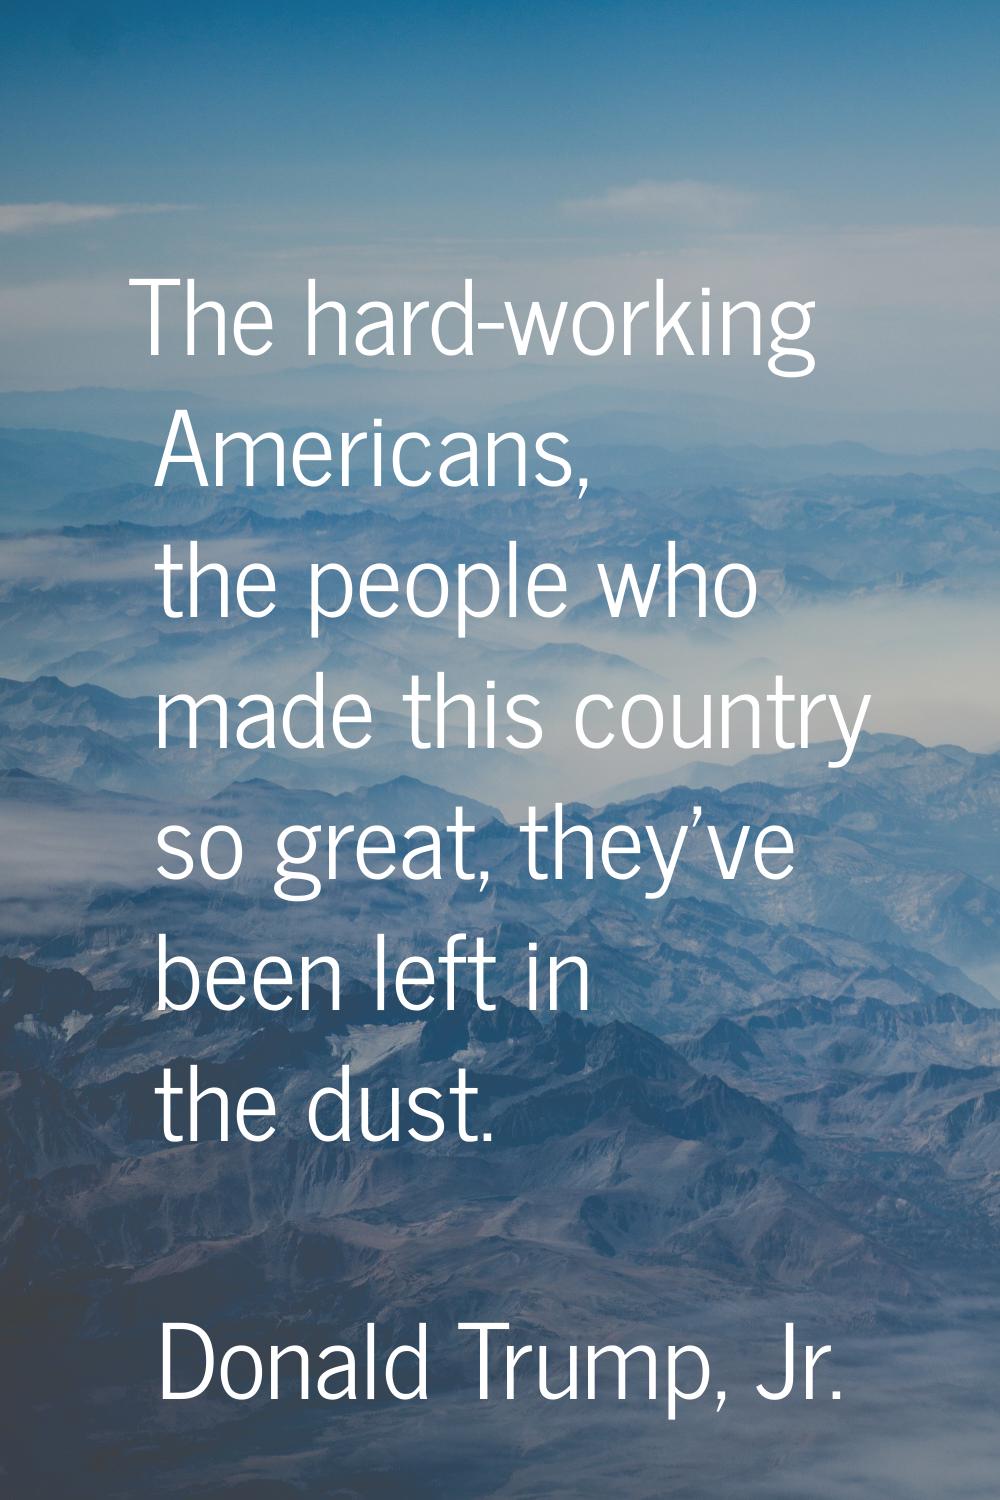 The hard-working Americans, the people who made this country so great, they've been left in the dus